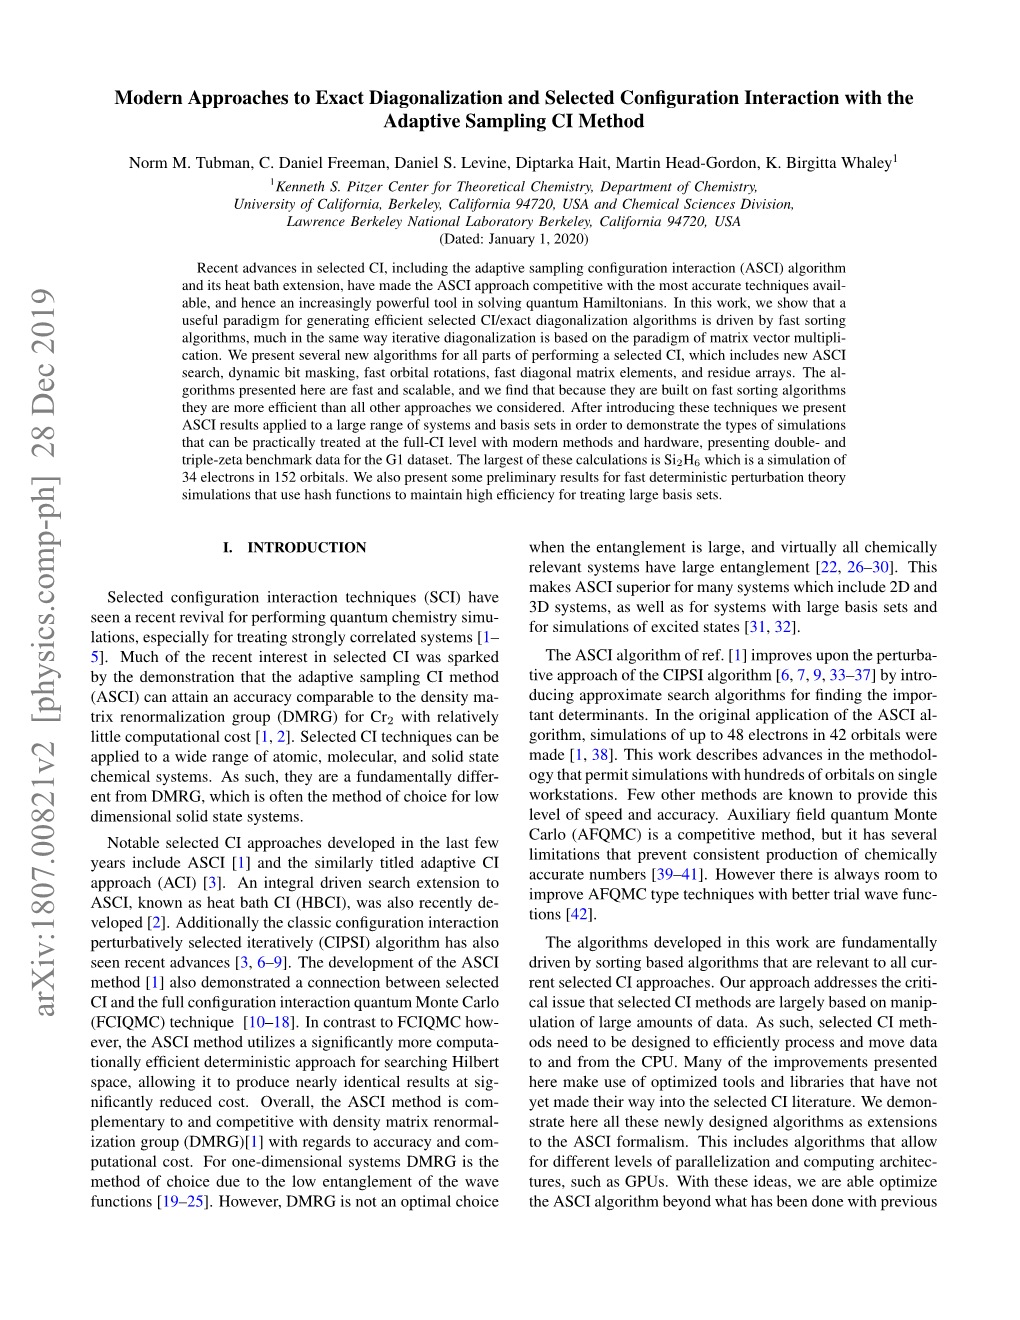 Modern Approaches to Exact Diagonalization and Selected Conﬁguration Interaction with the Adaptive Sampling CI Method